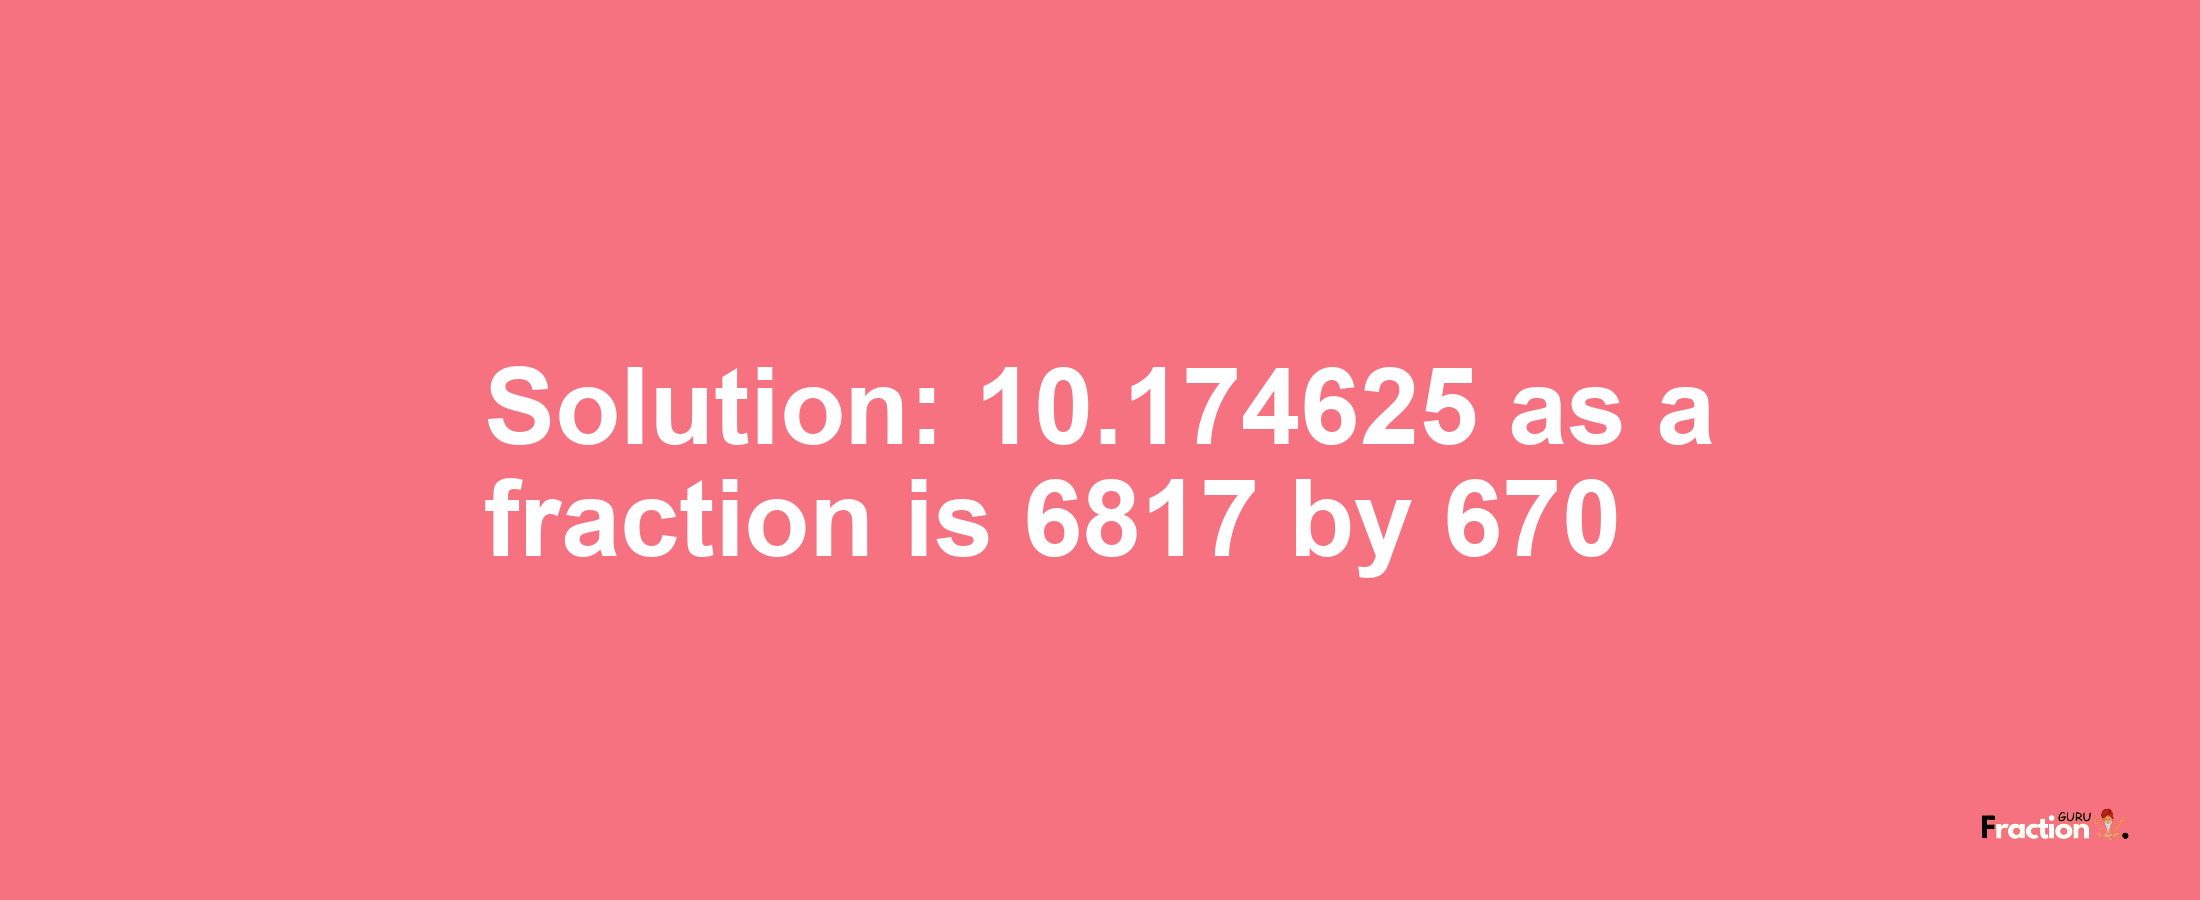 Solution:10.174625 as a fraction is 6817/670